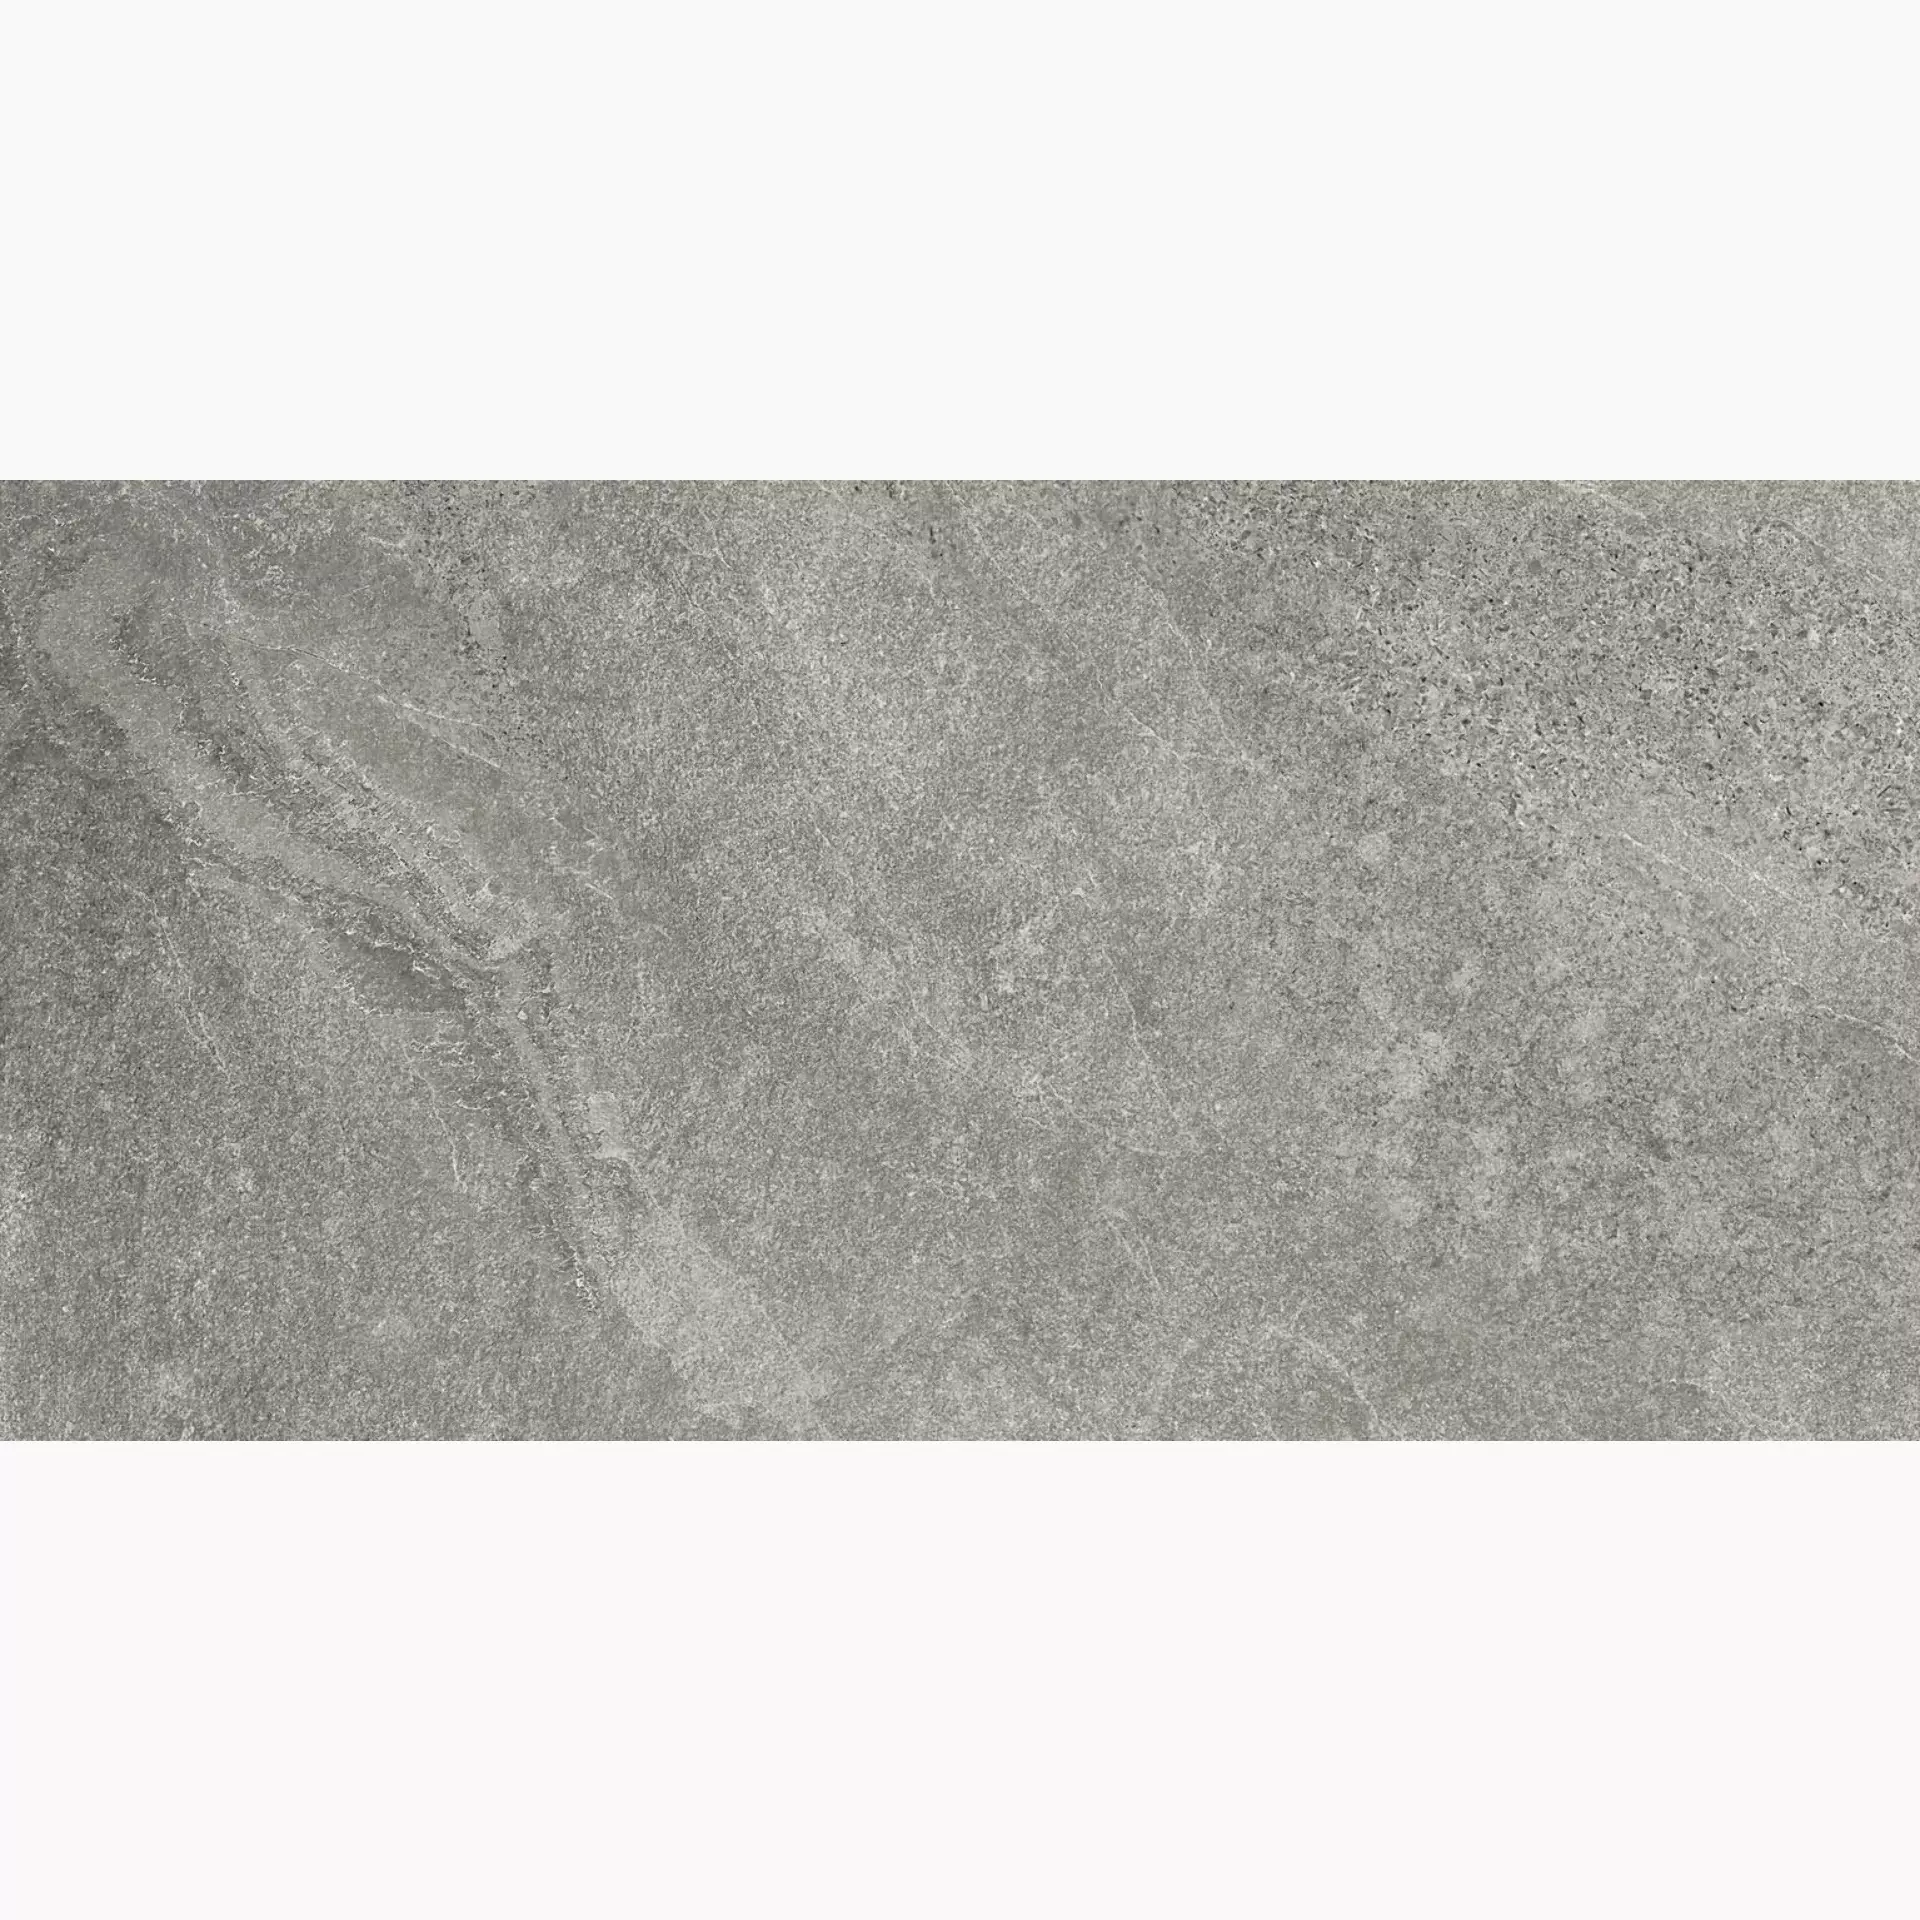 ABK Monolith Greige Naturale PF60002351 30x60cm rectified 8,5mm